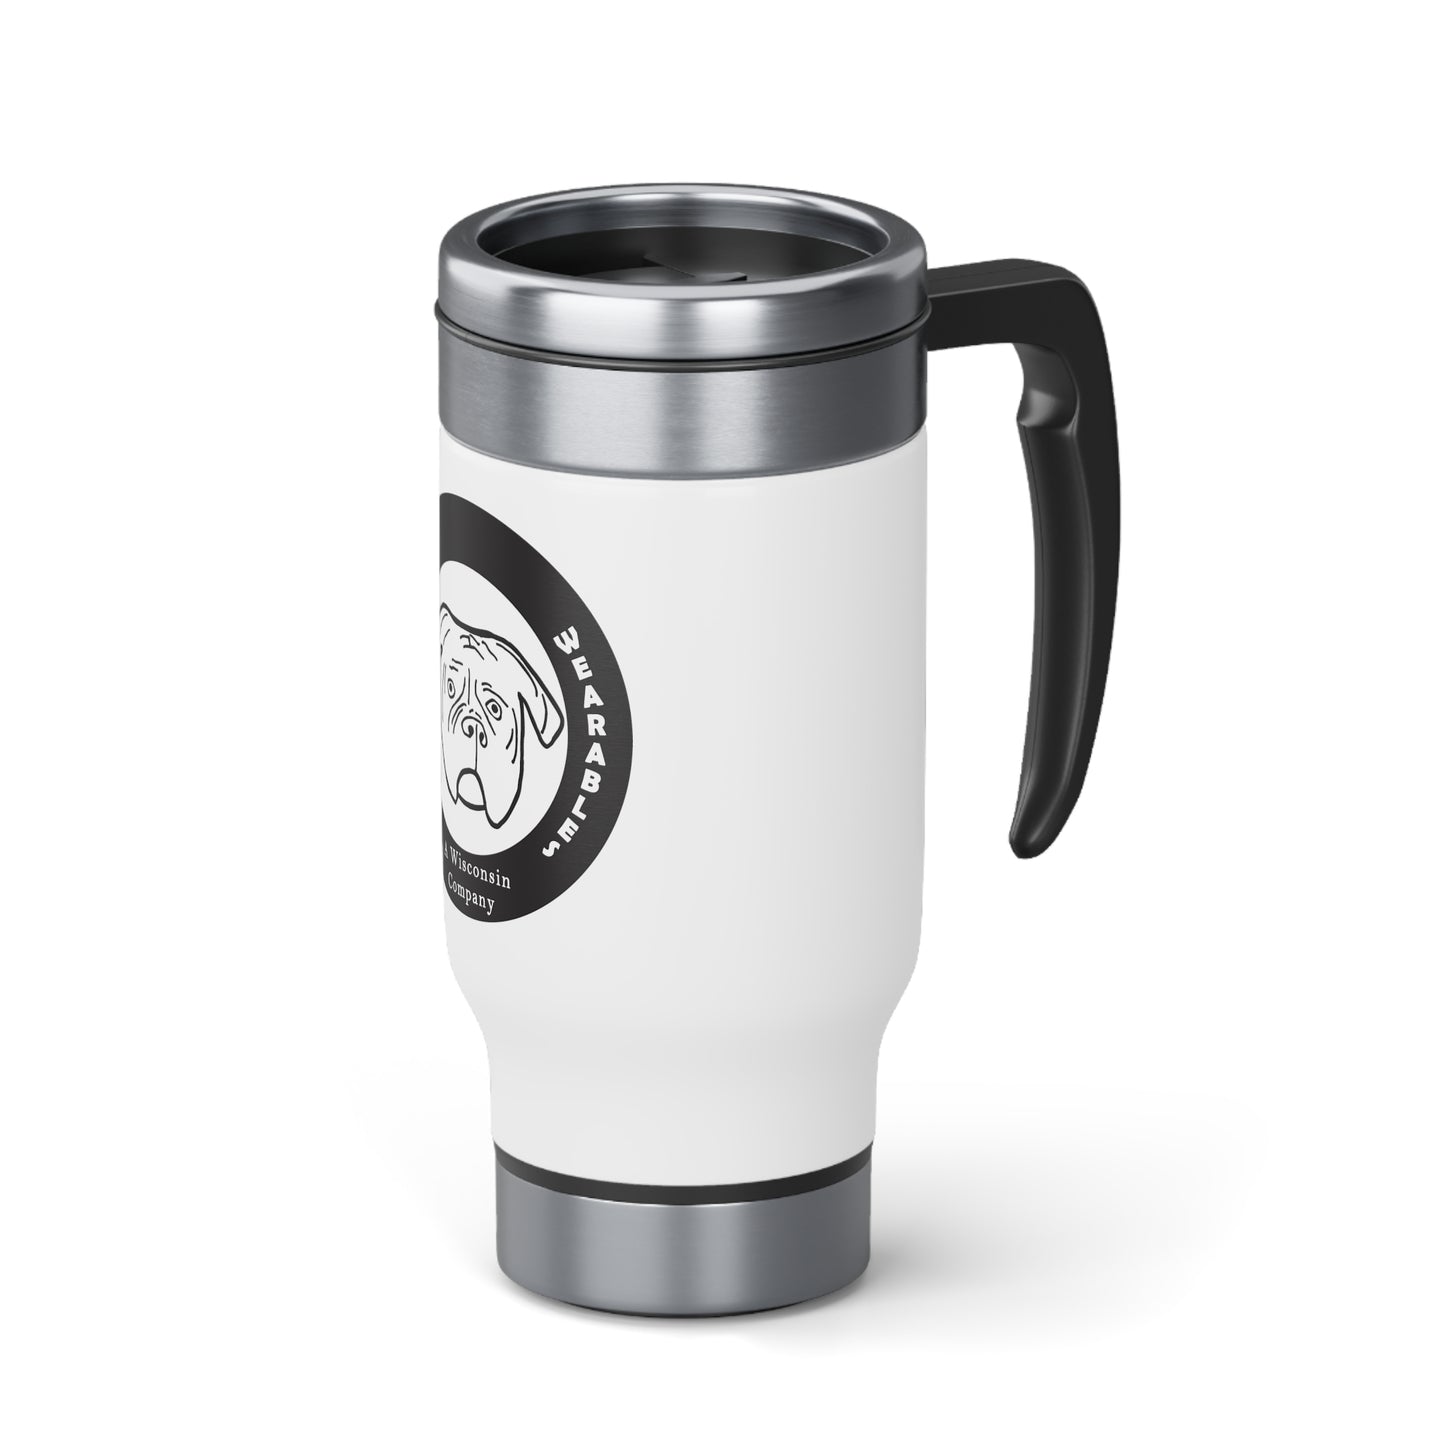 Walter's  Stainless Steel Travel Mug with Handle, 14oz